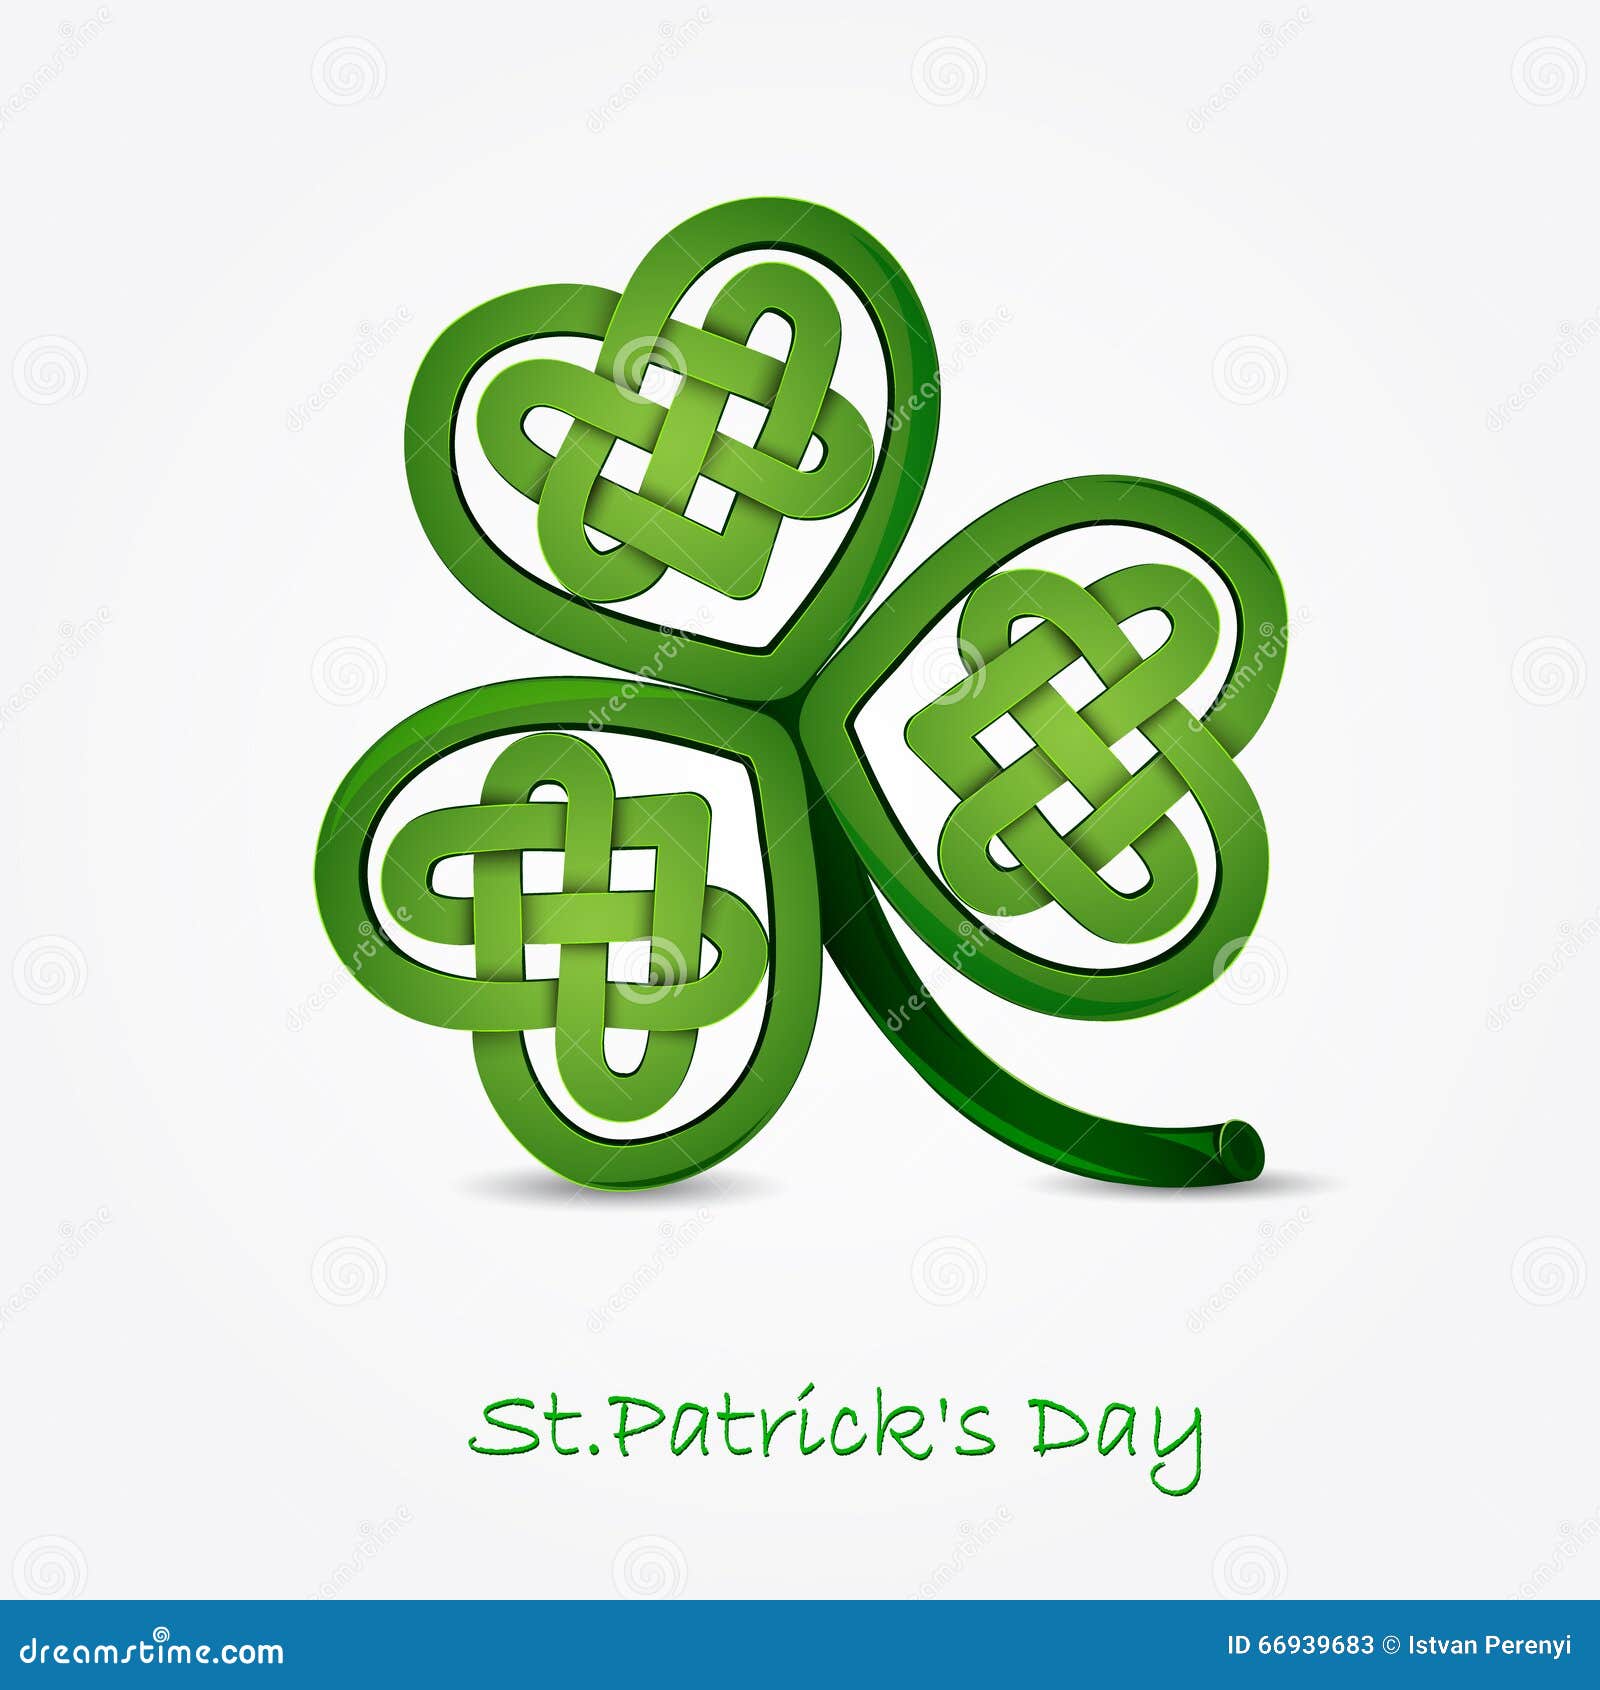 http://thumbs.dreamstime.com/z/st-patrick-s-day-card-clover-66939683.jpg